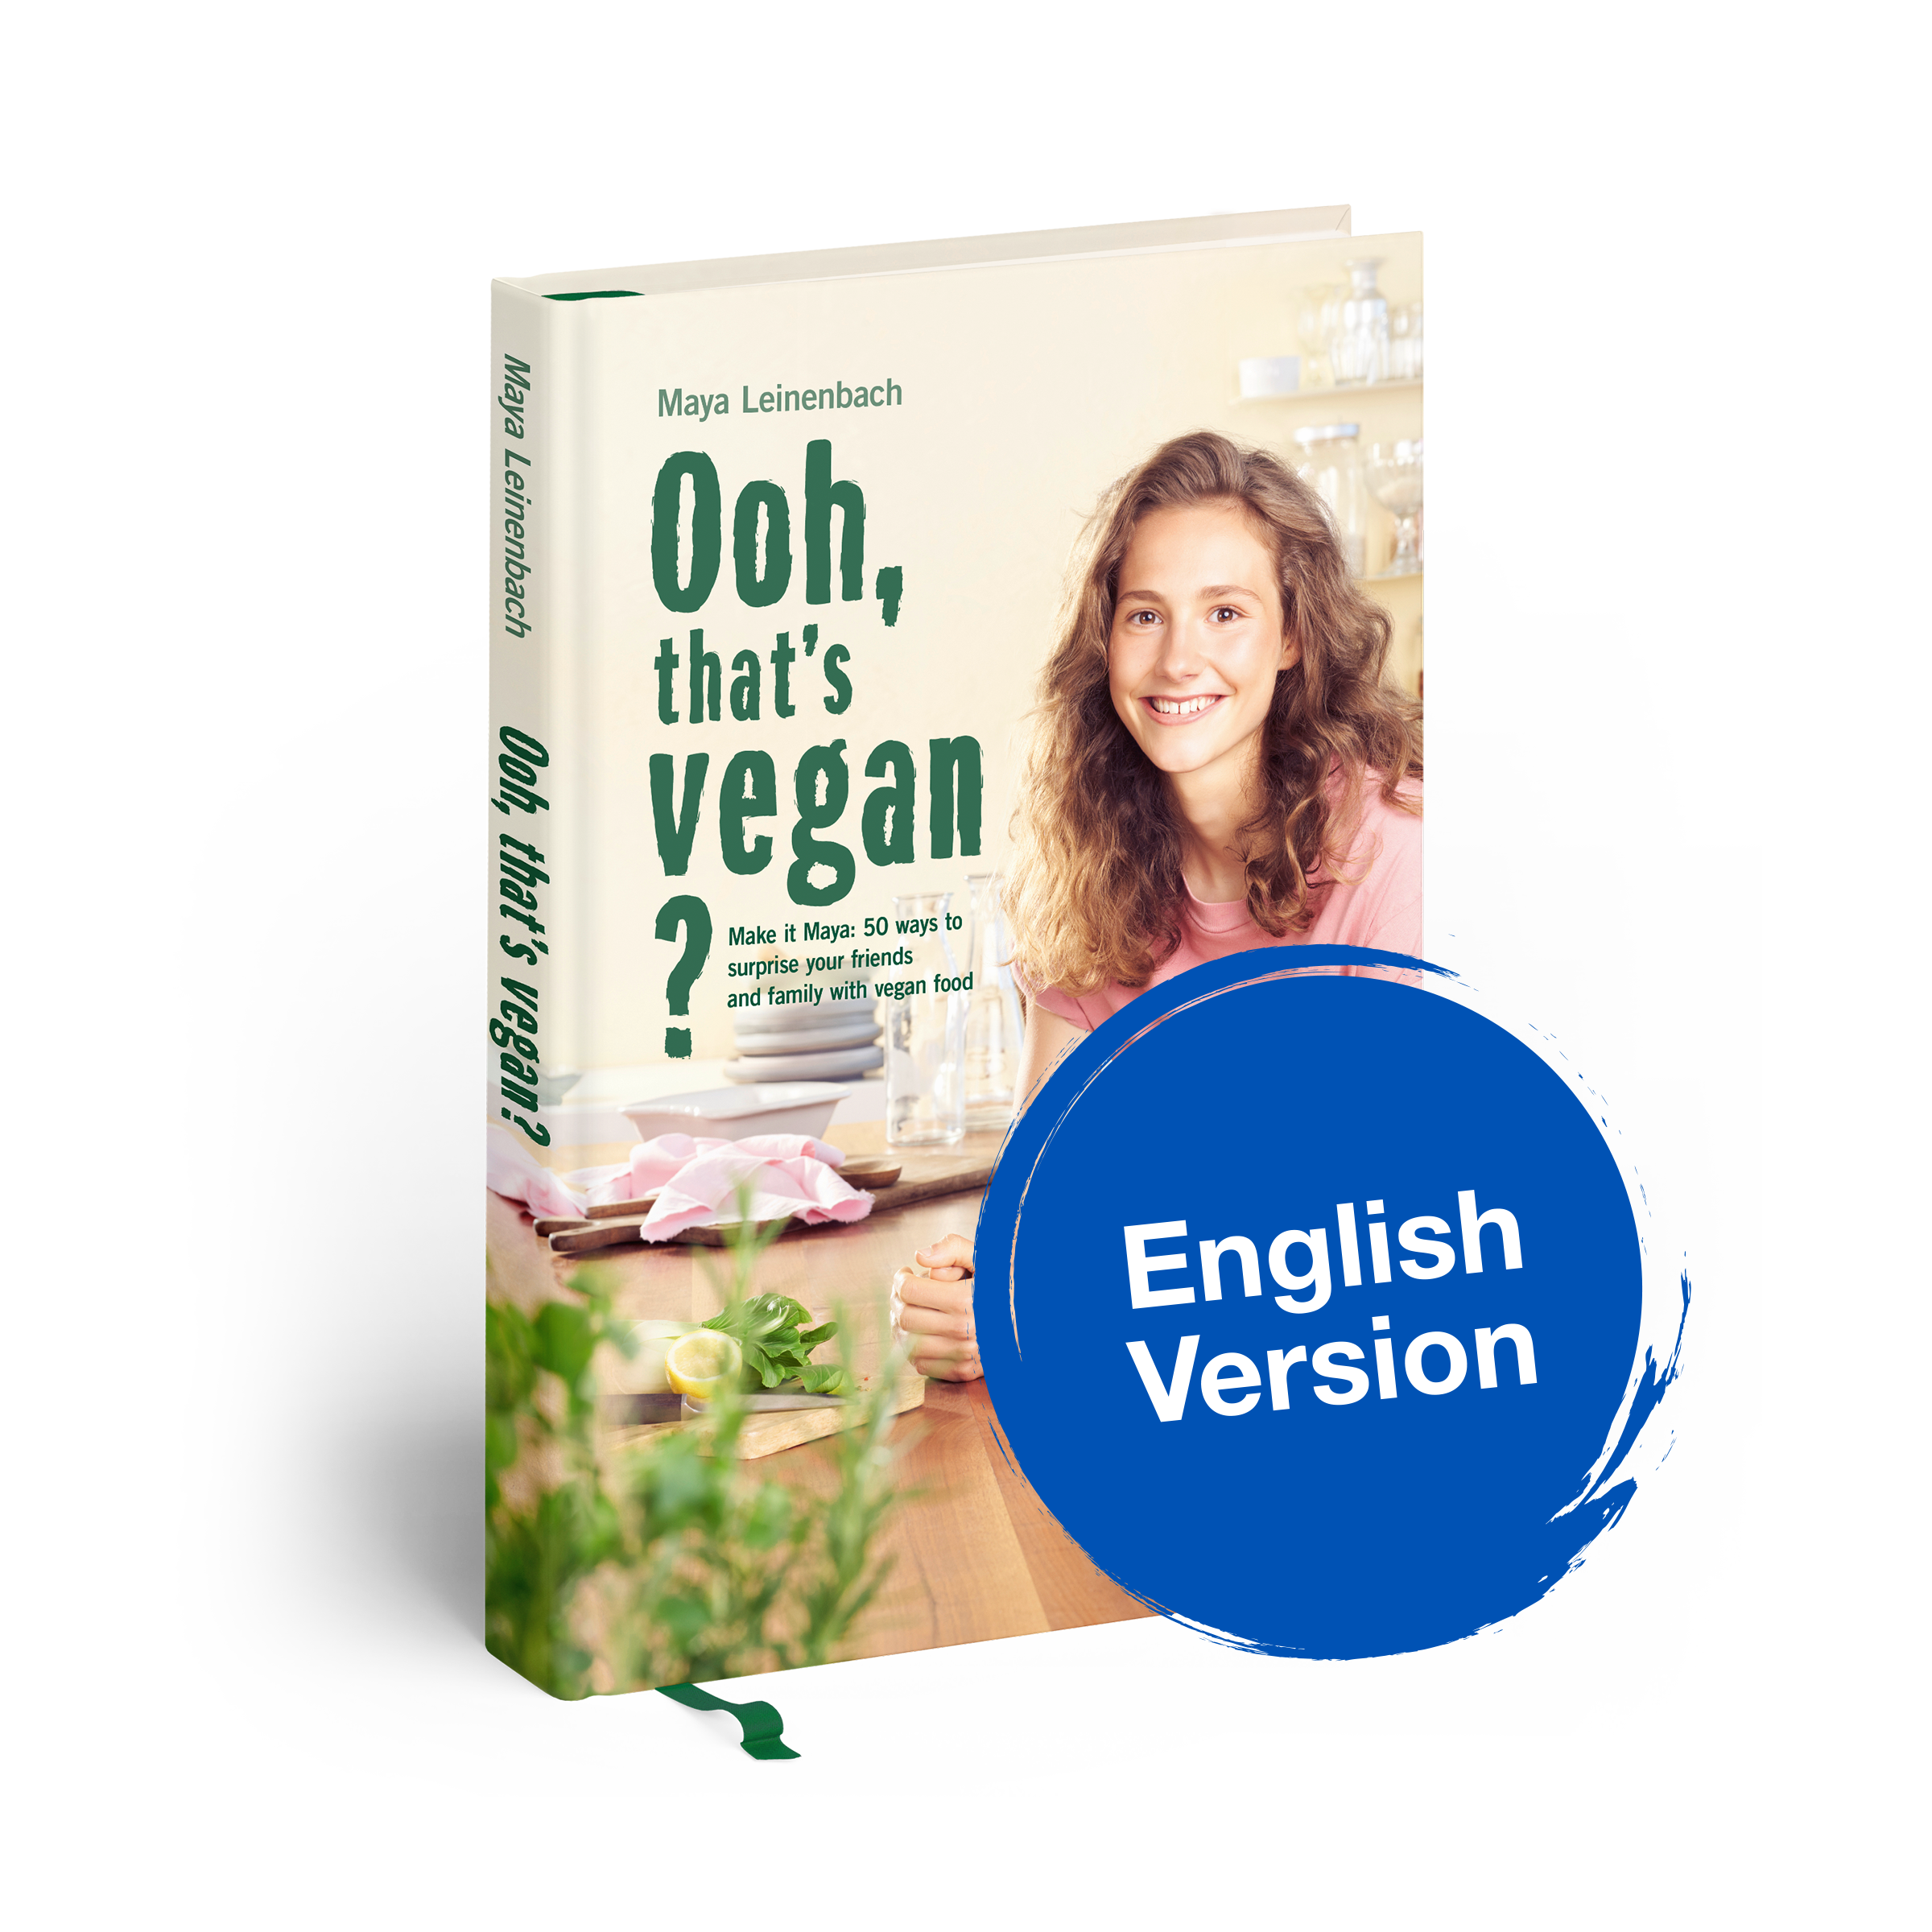 Cover of English cook book: Ooh, that's vegan